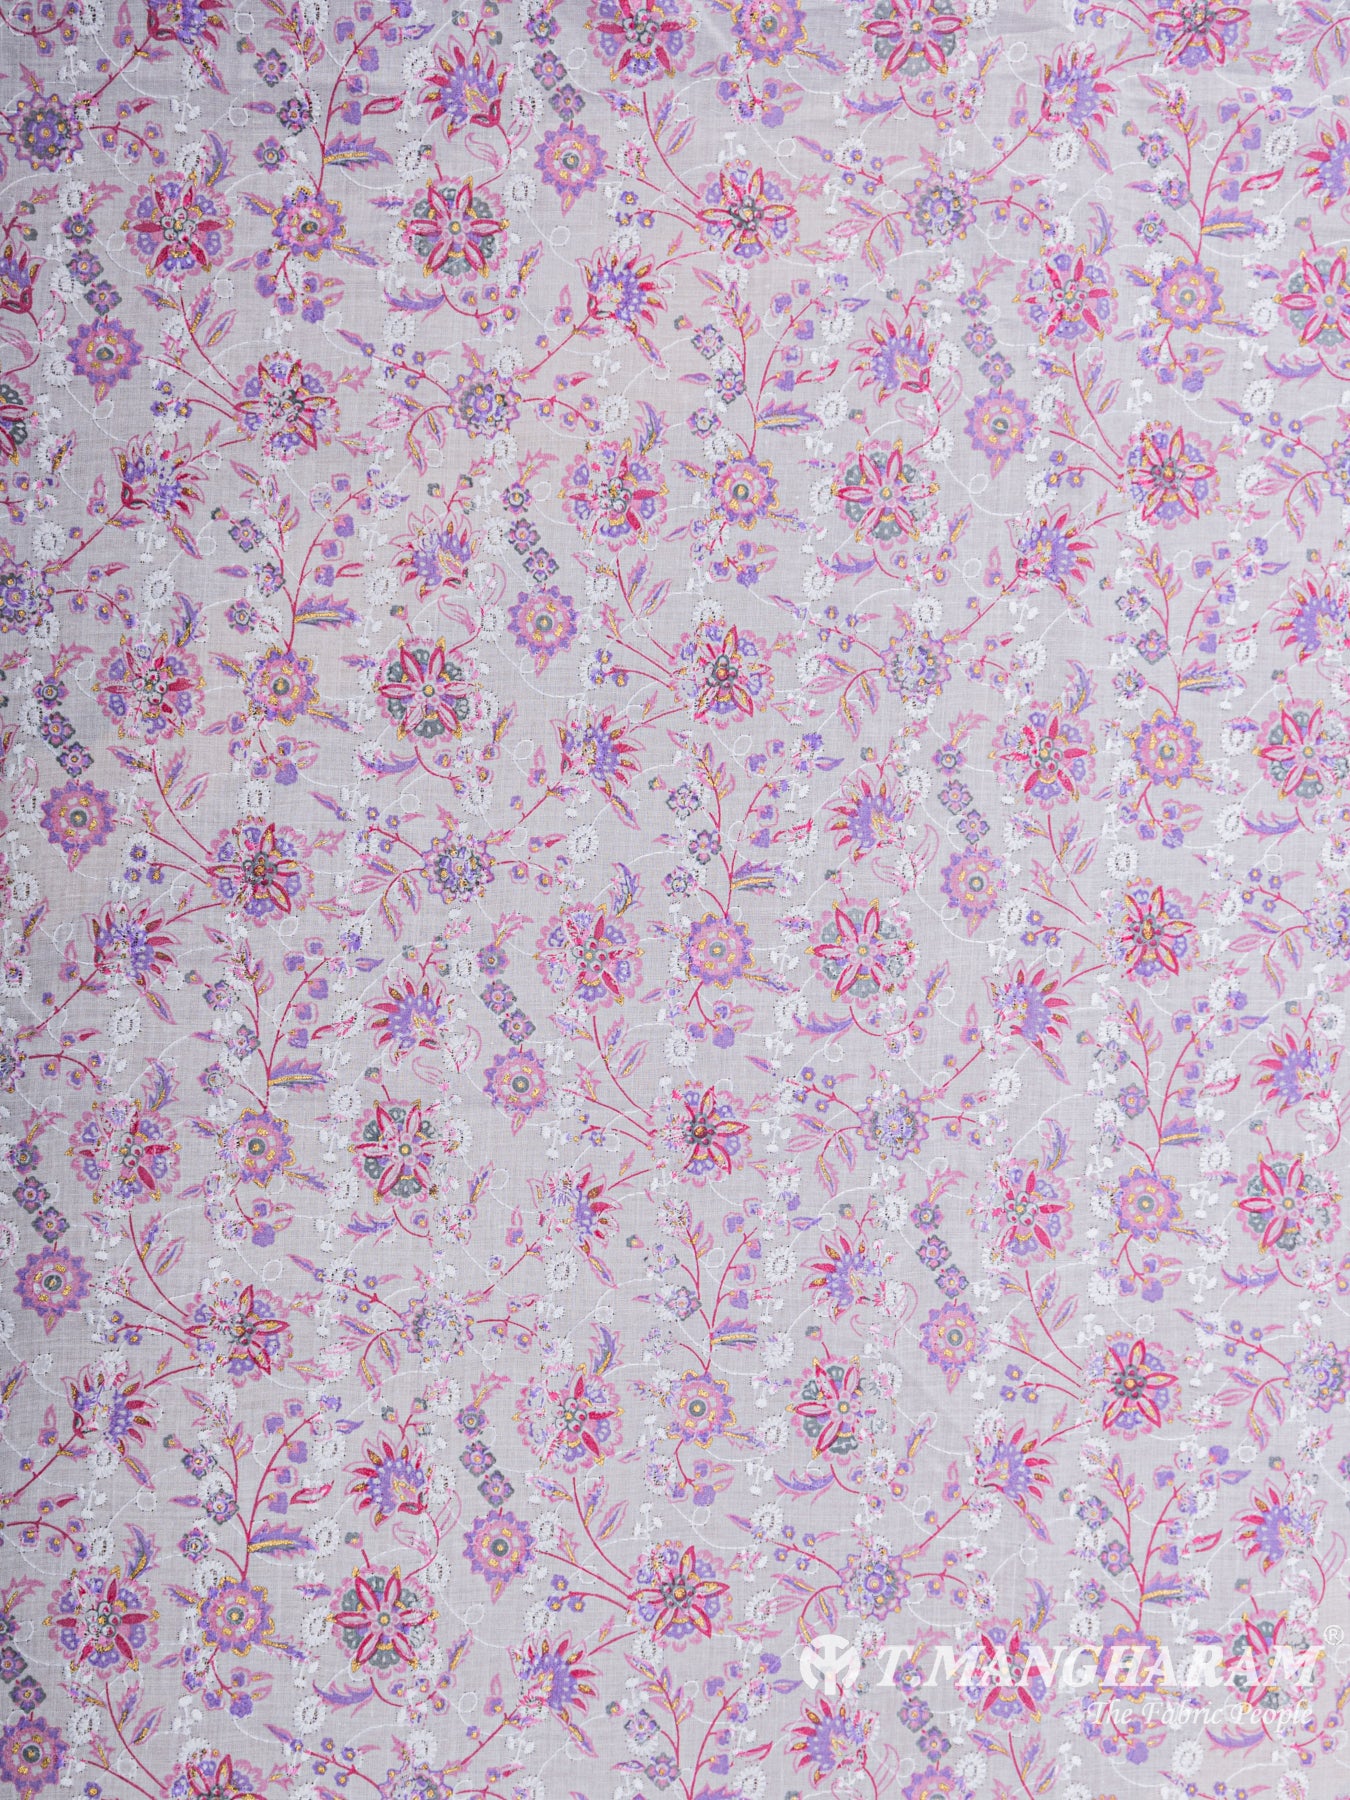 Violet Cotton Embroidery Fabric - EA1708 view-3